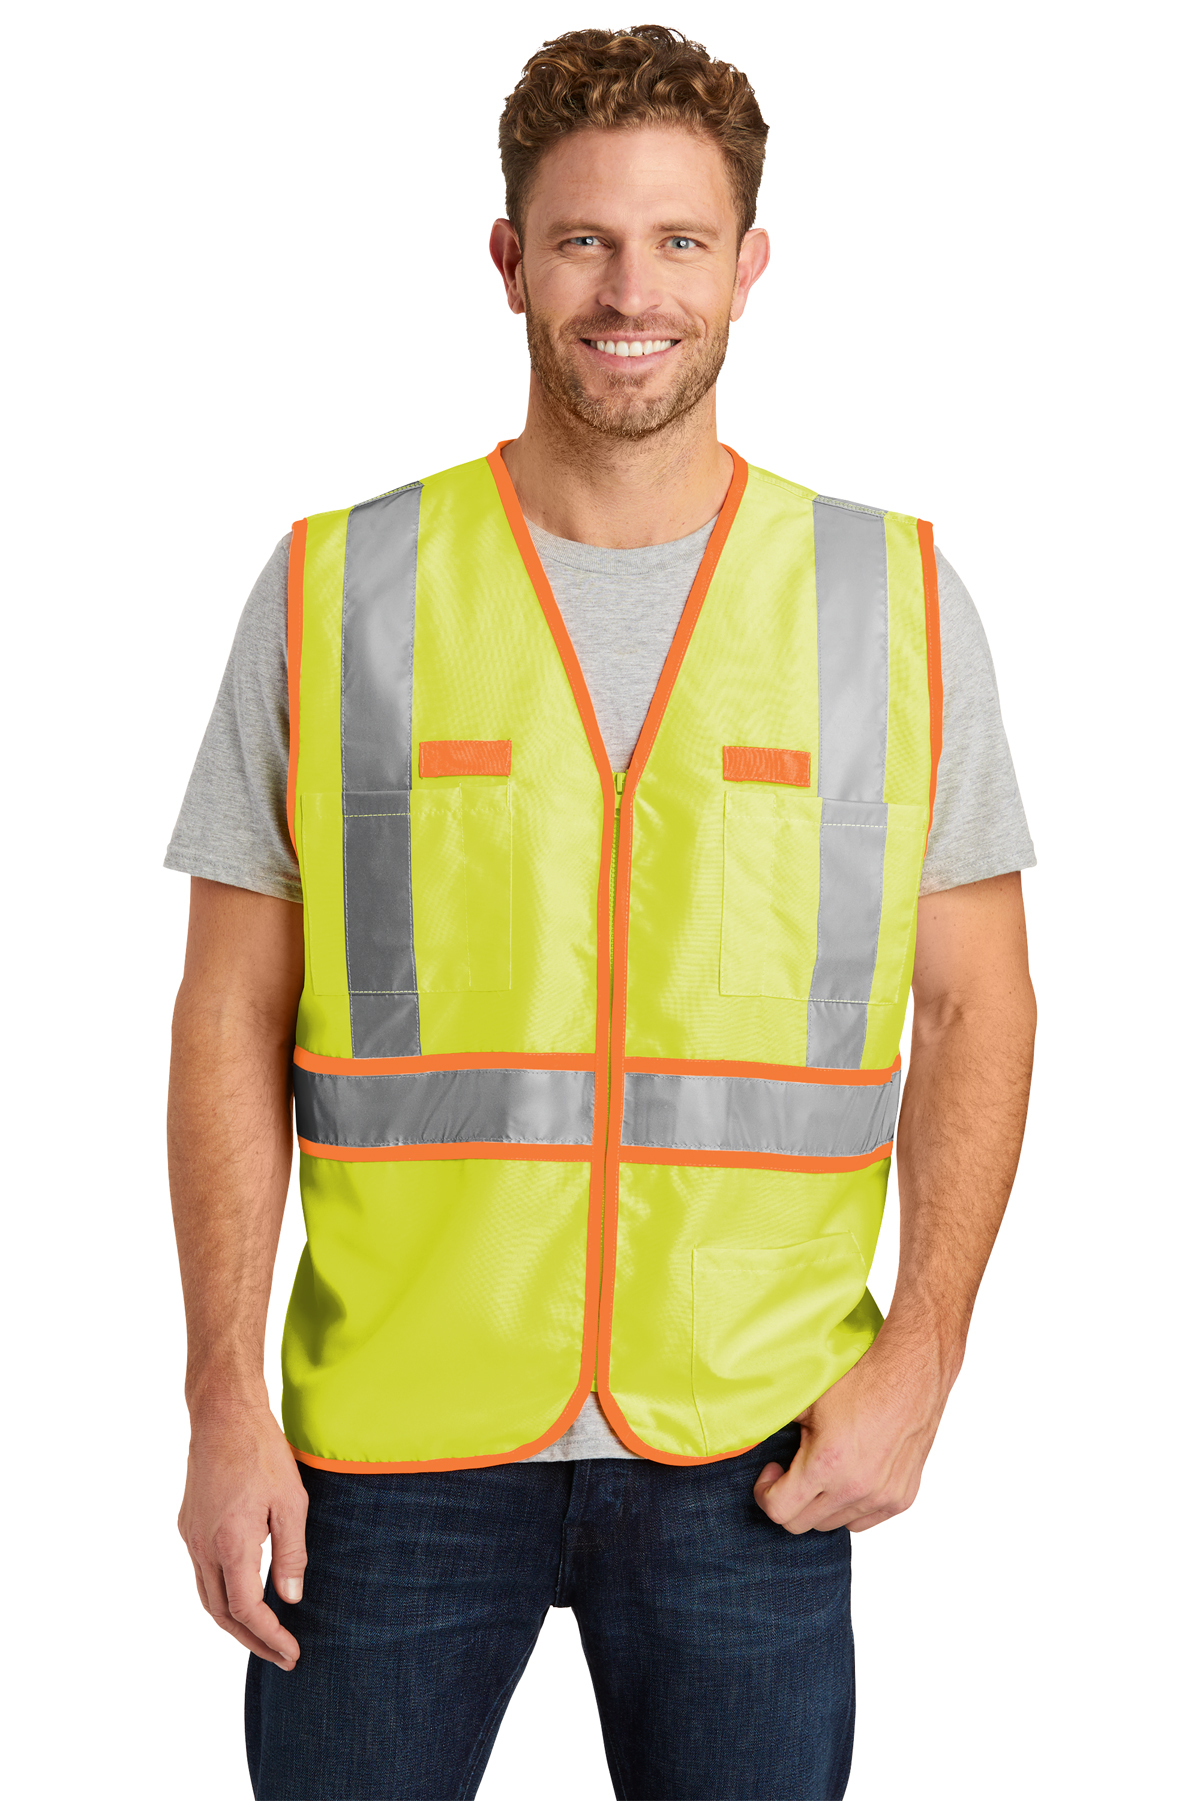 CornerStone - ANSI 107 Class 2 Dual-Color Safety Vest, Product